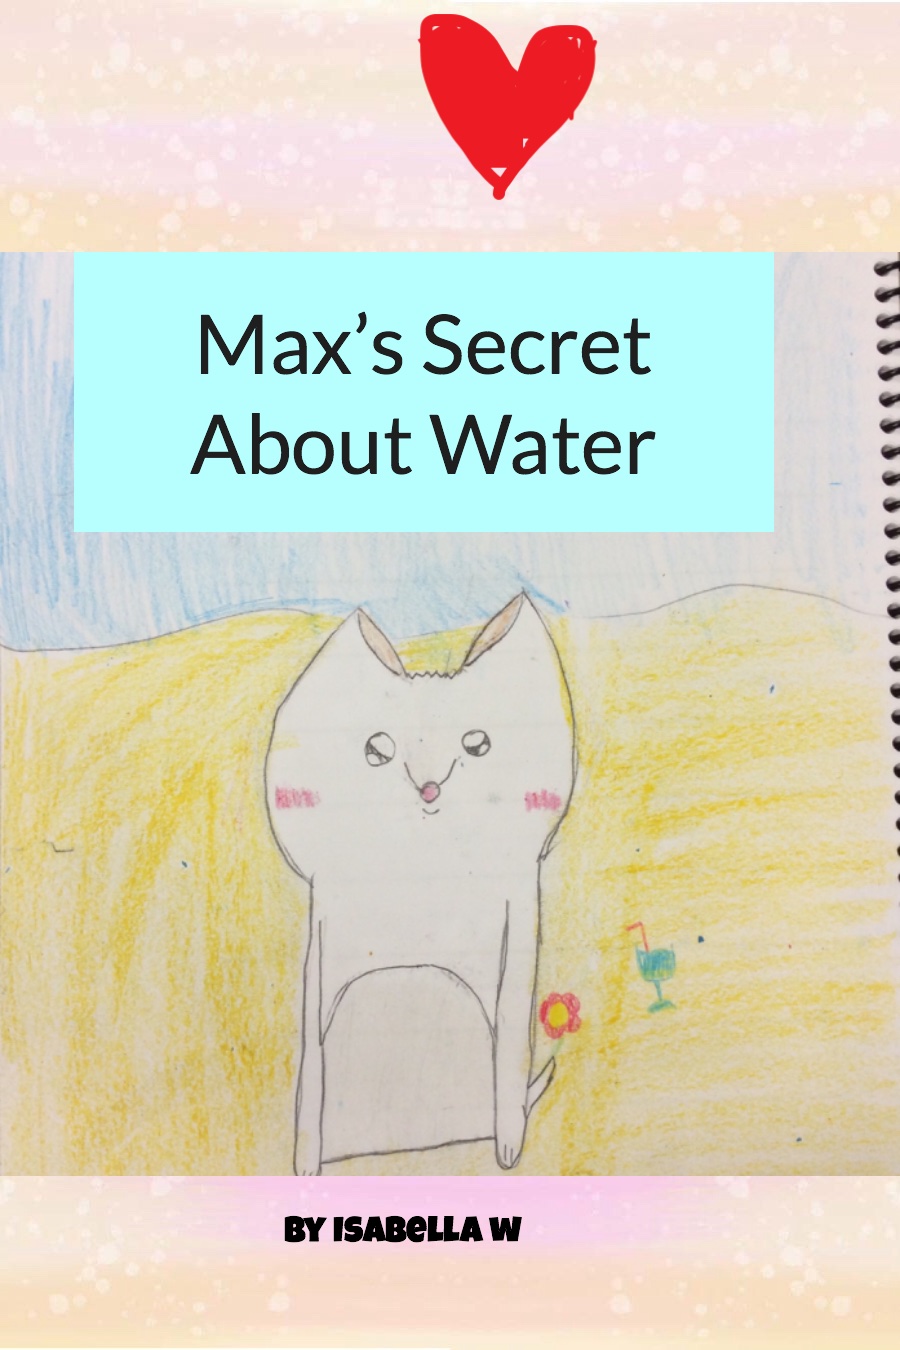 Max’s Secret About Water by Isabella W